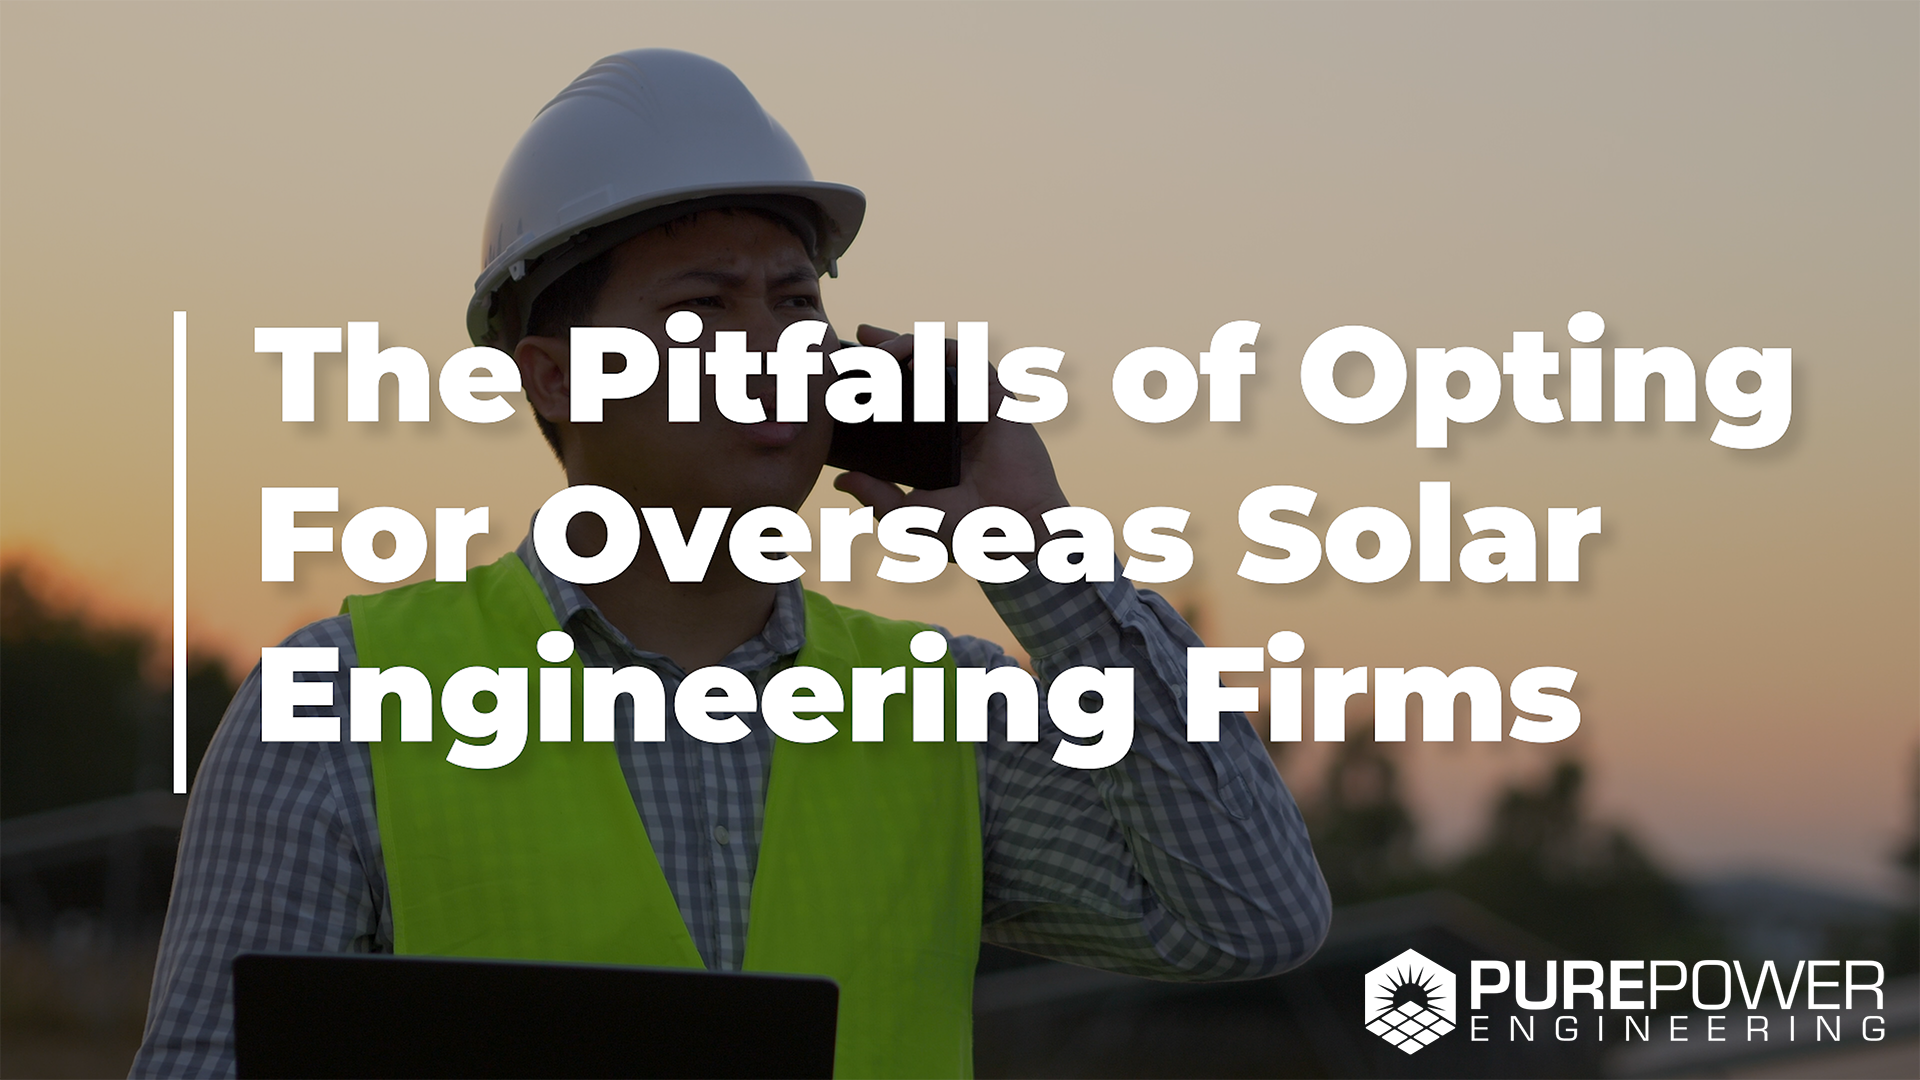 The Pitfalls of Opting for Overseas Solar Engineering Firms